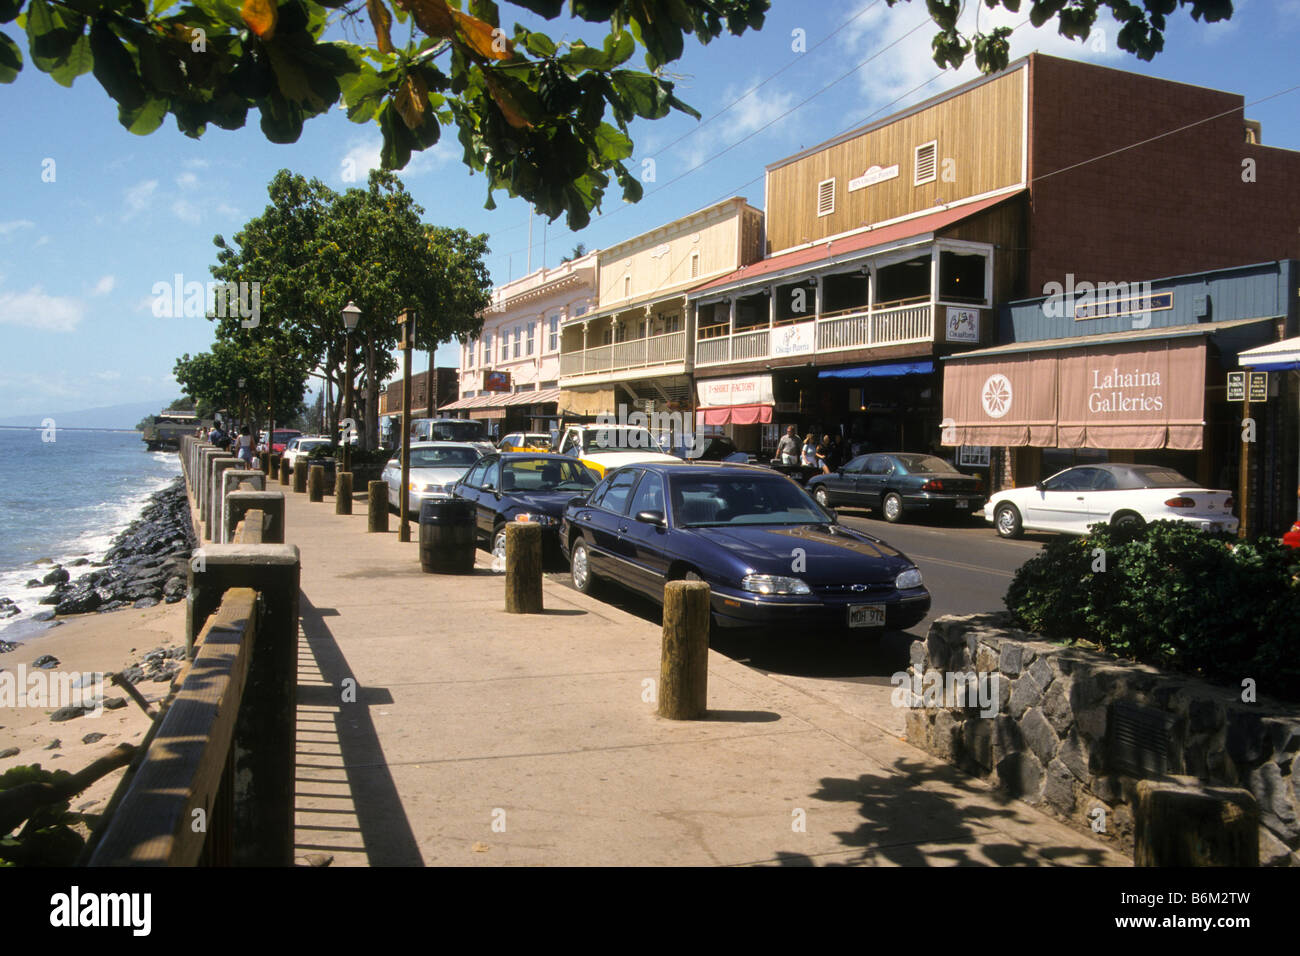 Street in Lahaina, Maui, Hawaii full of art galleries and restaurants for tourists to enjoy. Stock Photo